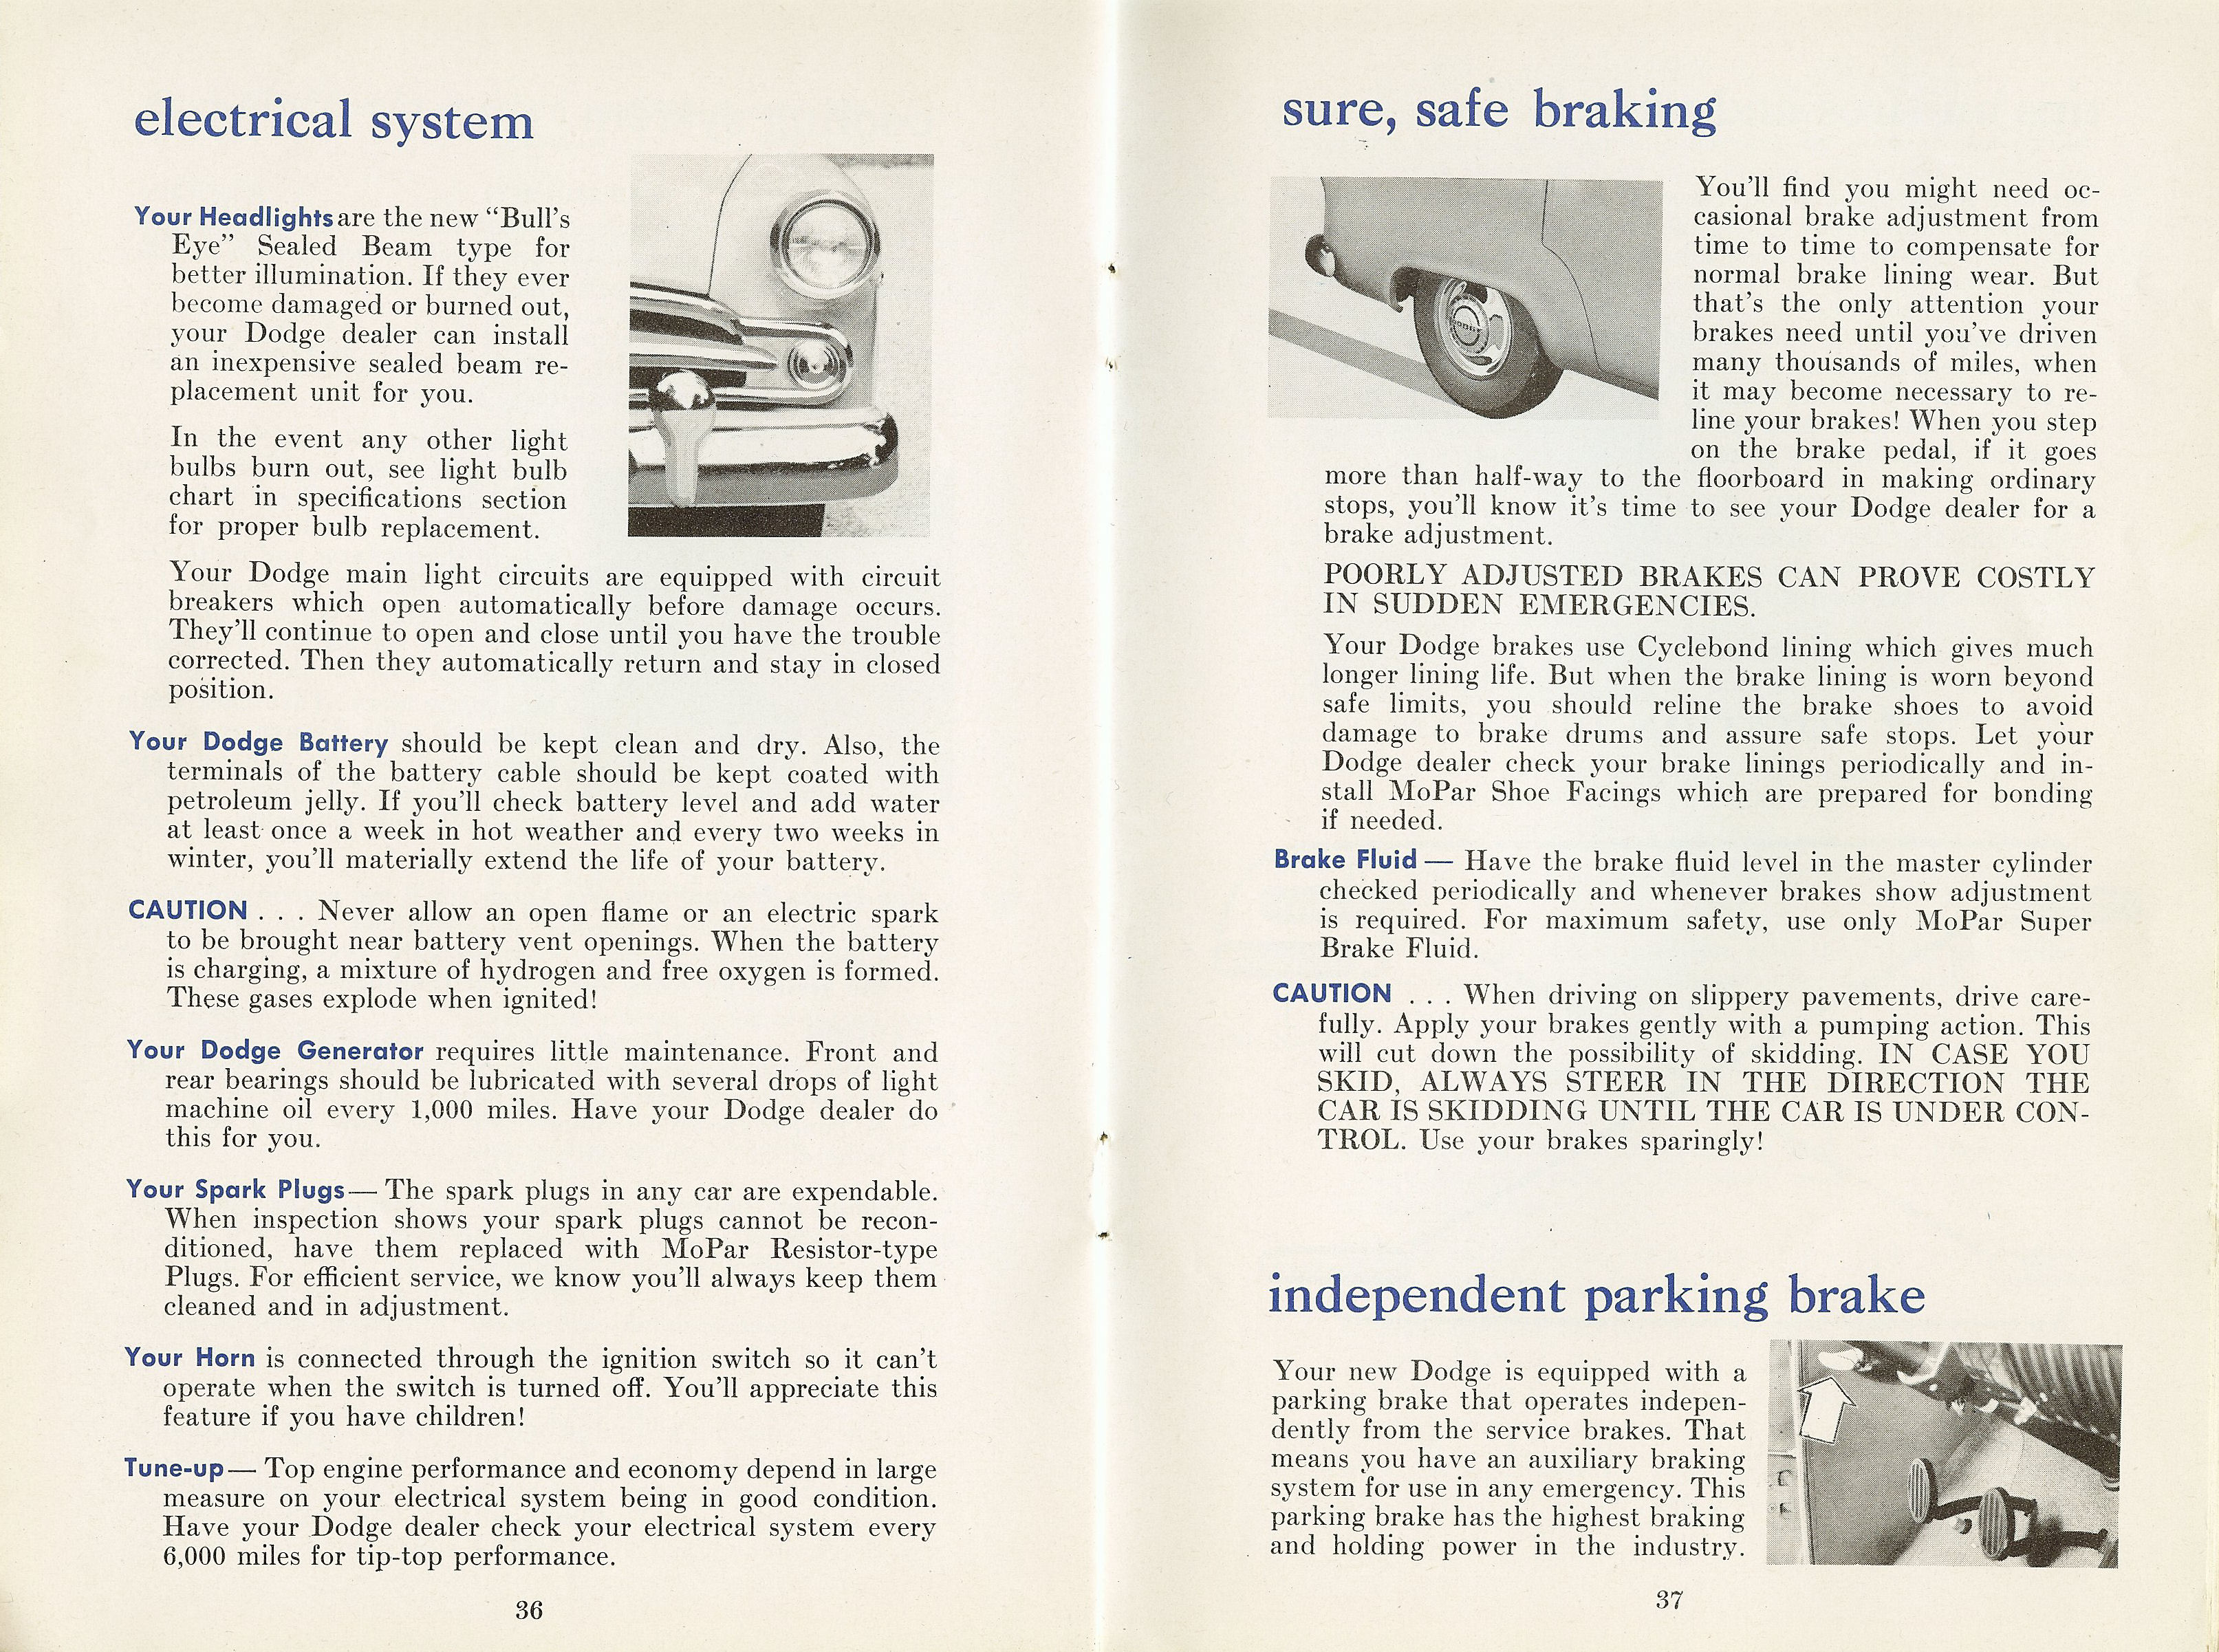 1954_Dodge_Owners_Manual-36-37